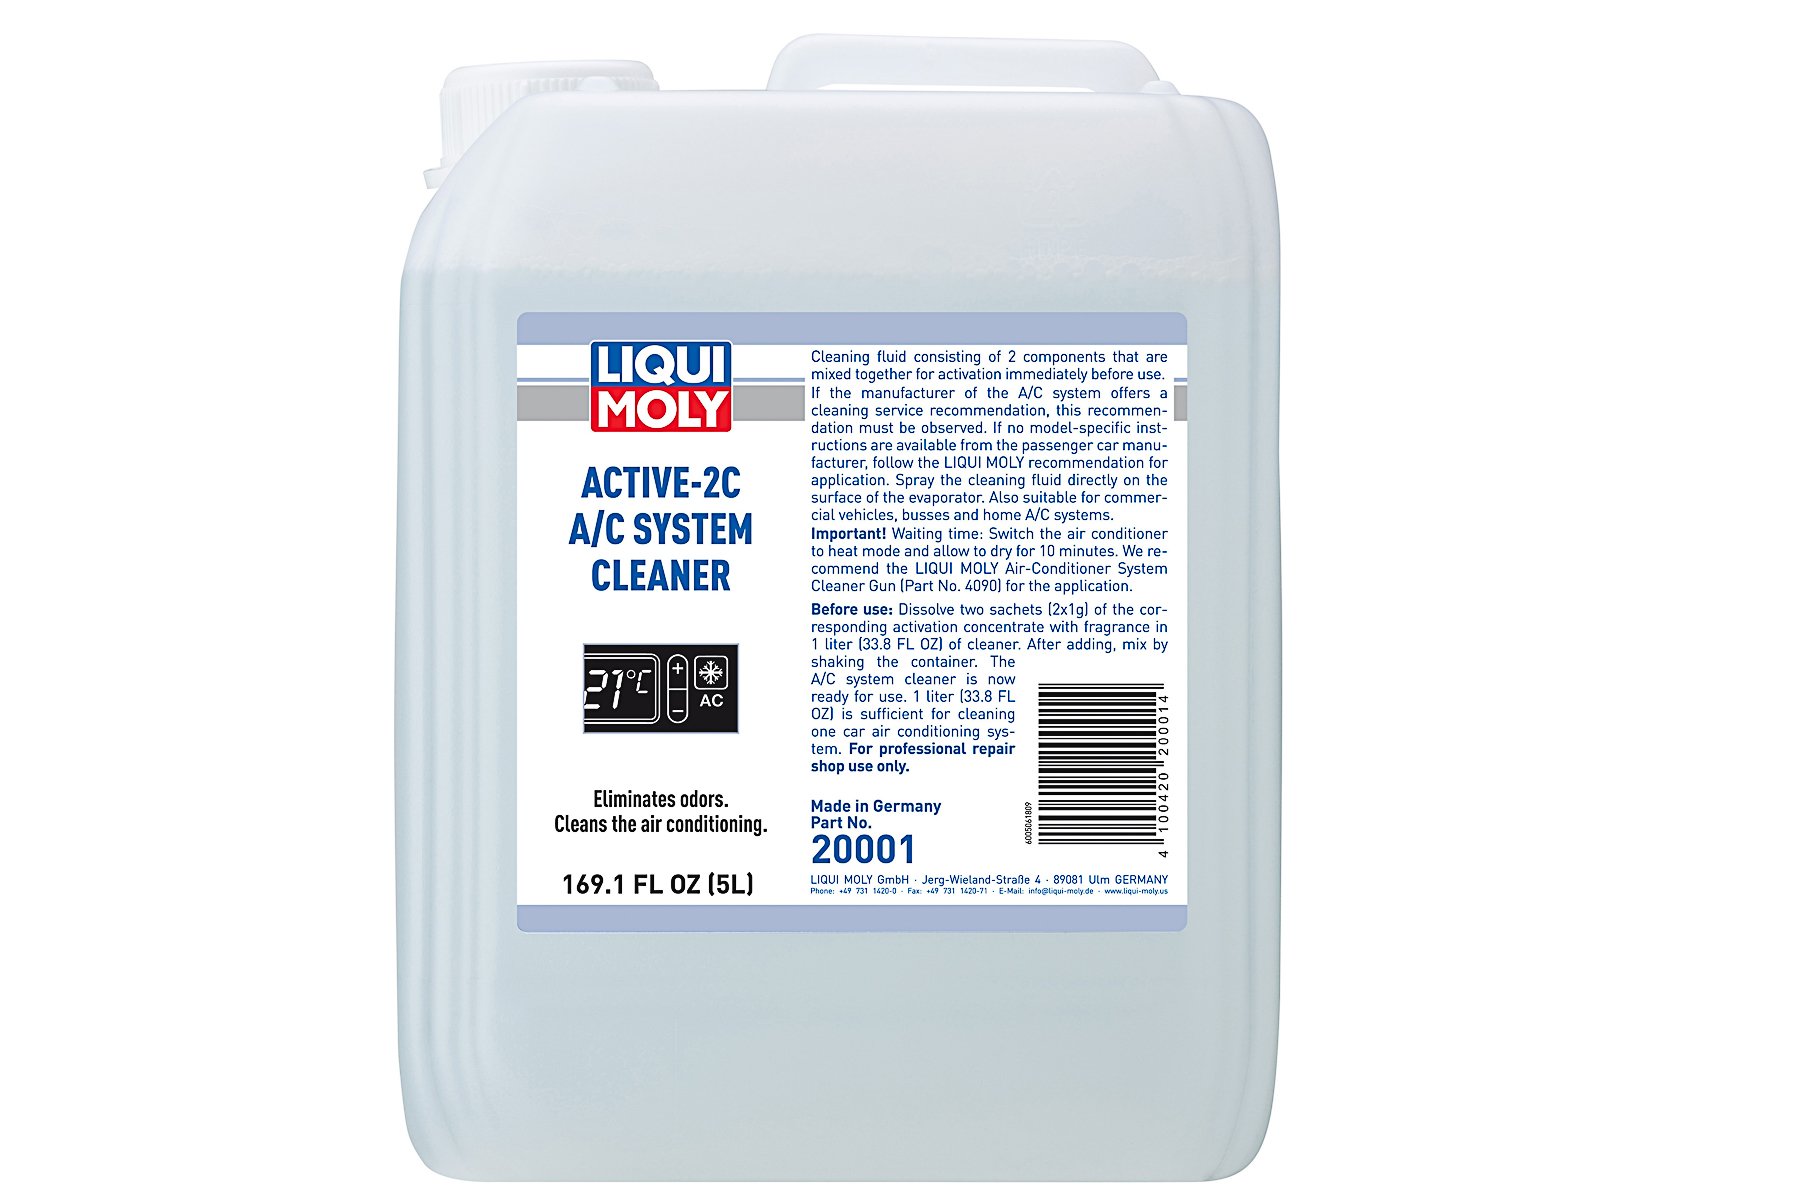 Improve Your Air Conditioning With LIQUI MOLY’s AC System Cleaner